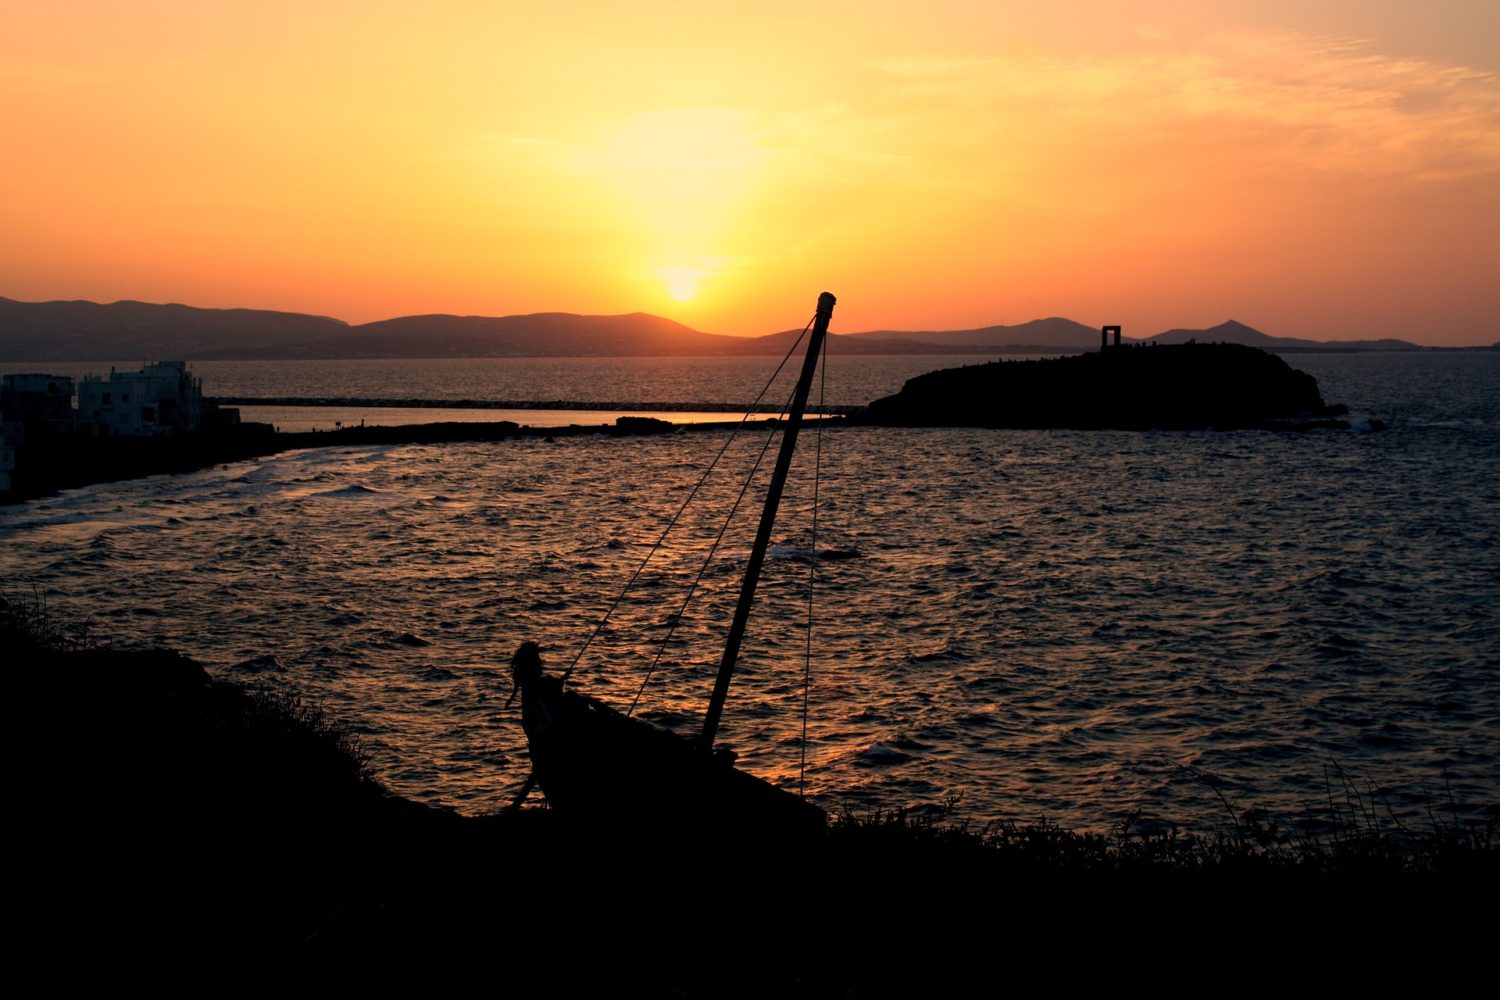 After a day of hiking the Greek islands, take in the relaxing seas at sunset.